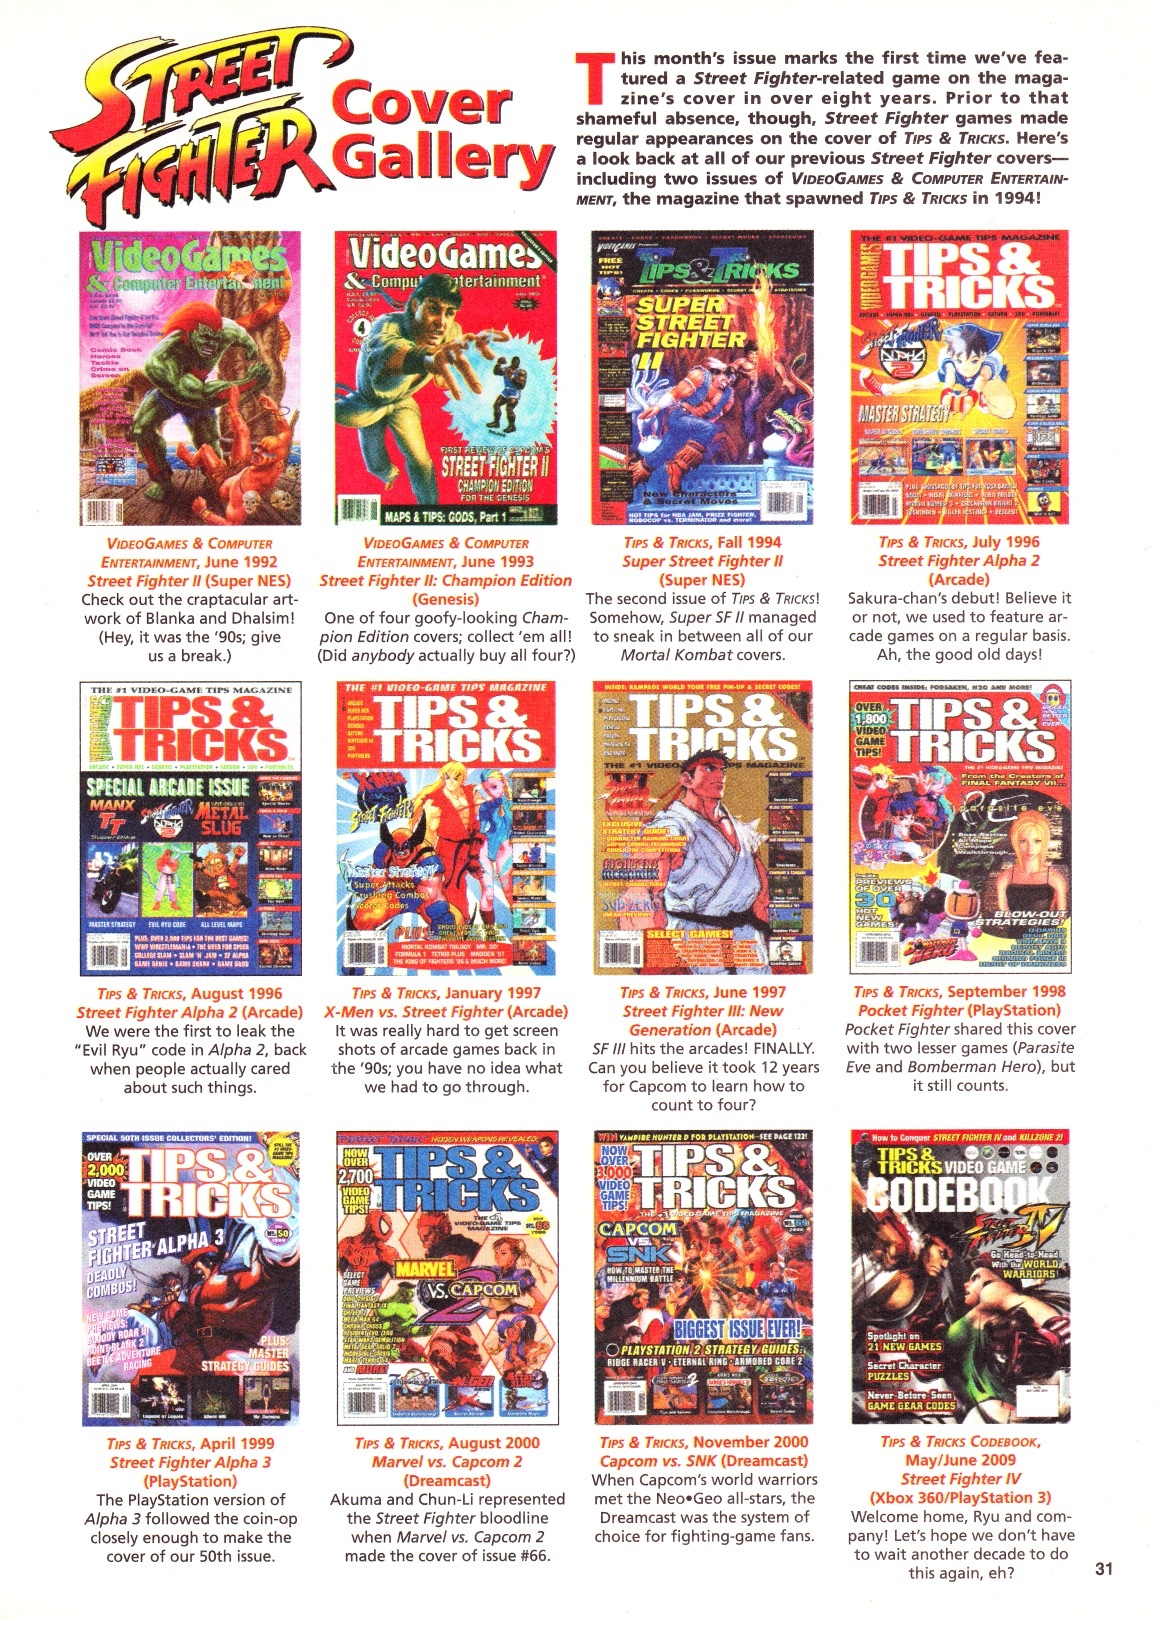 Street Fighters Tips and Tricks Magazine Covers